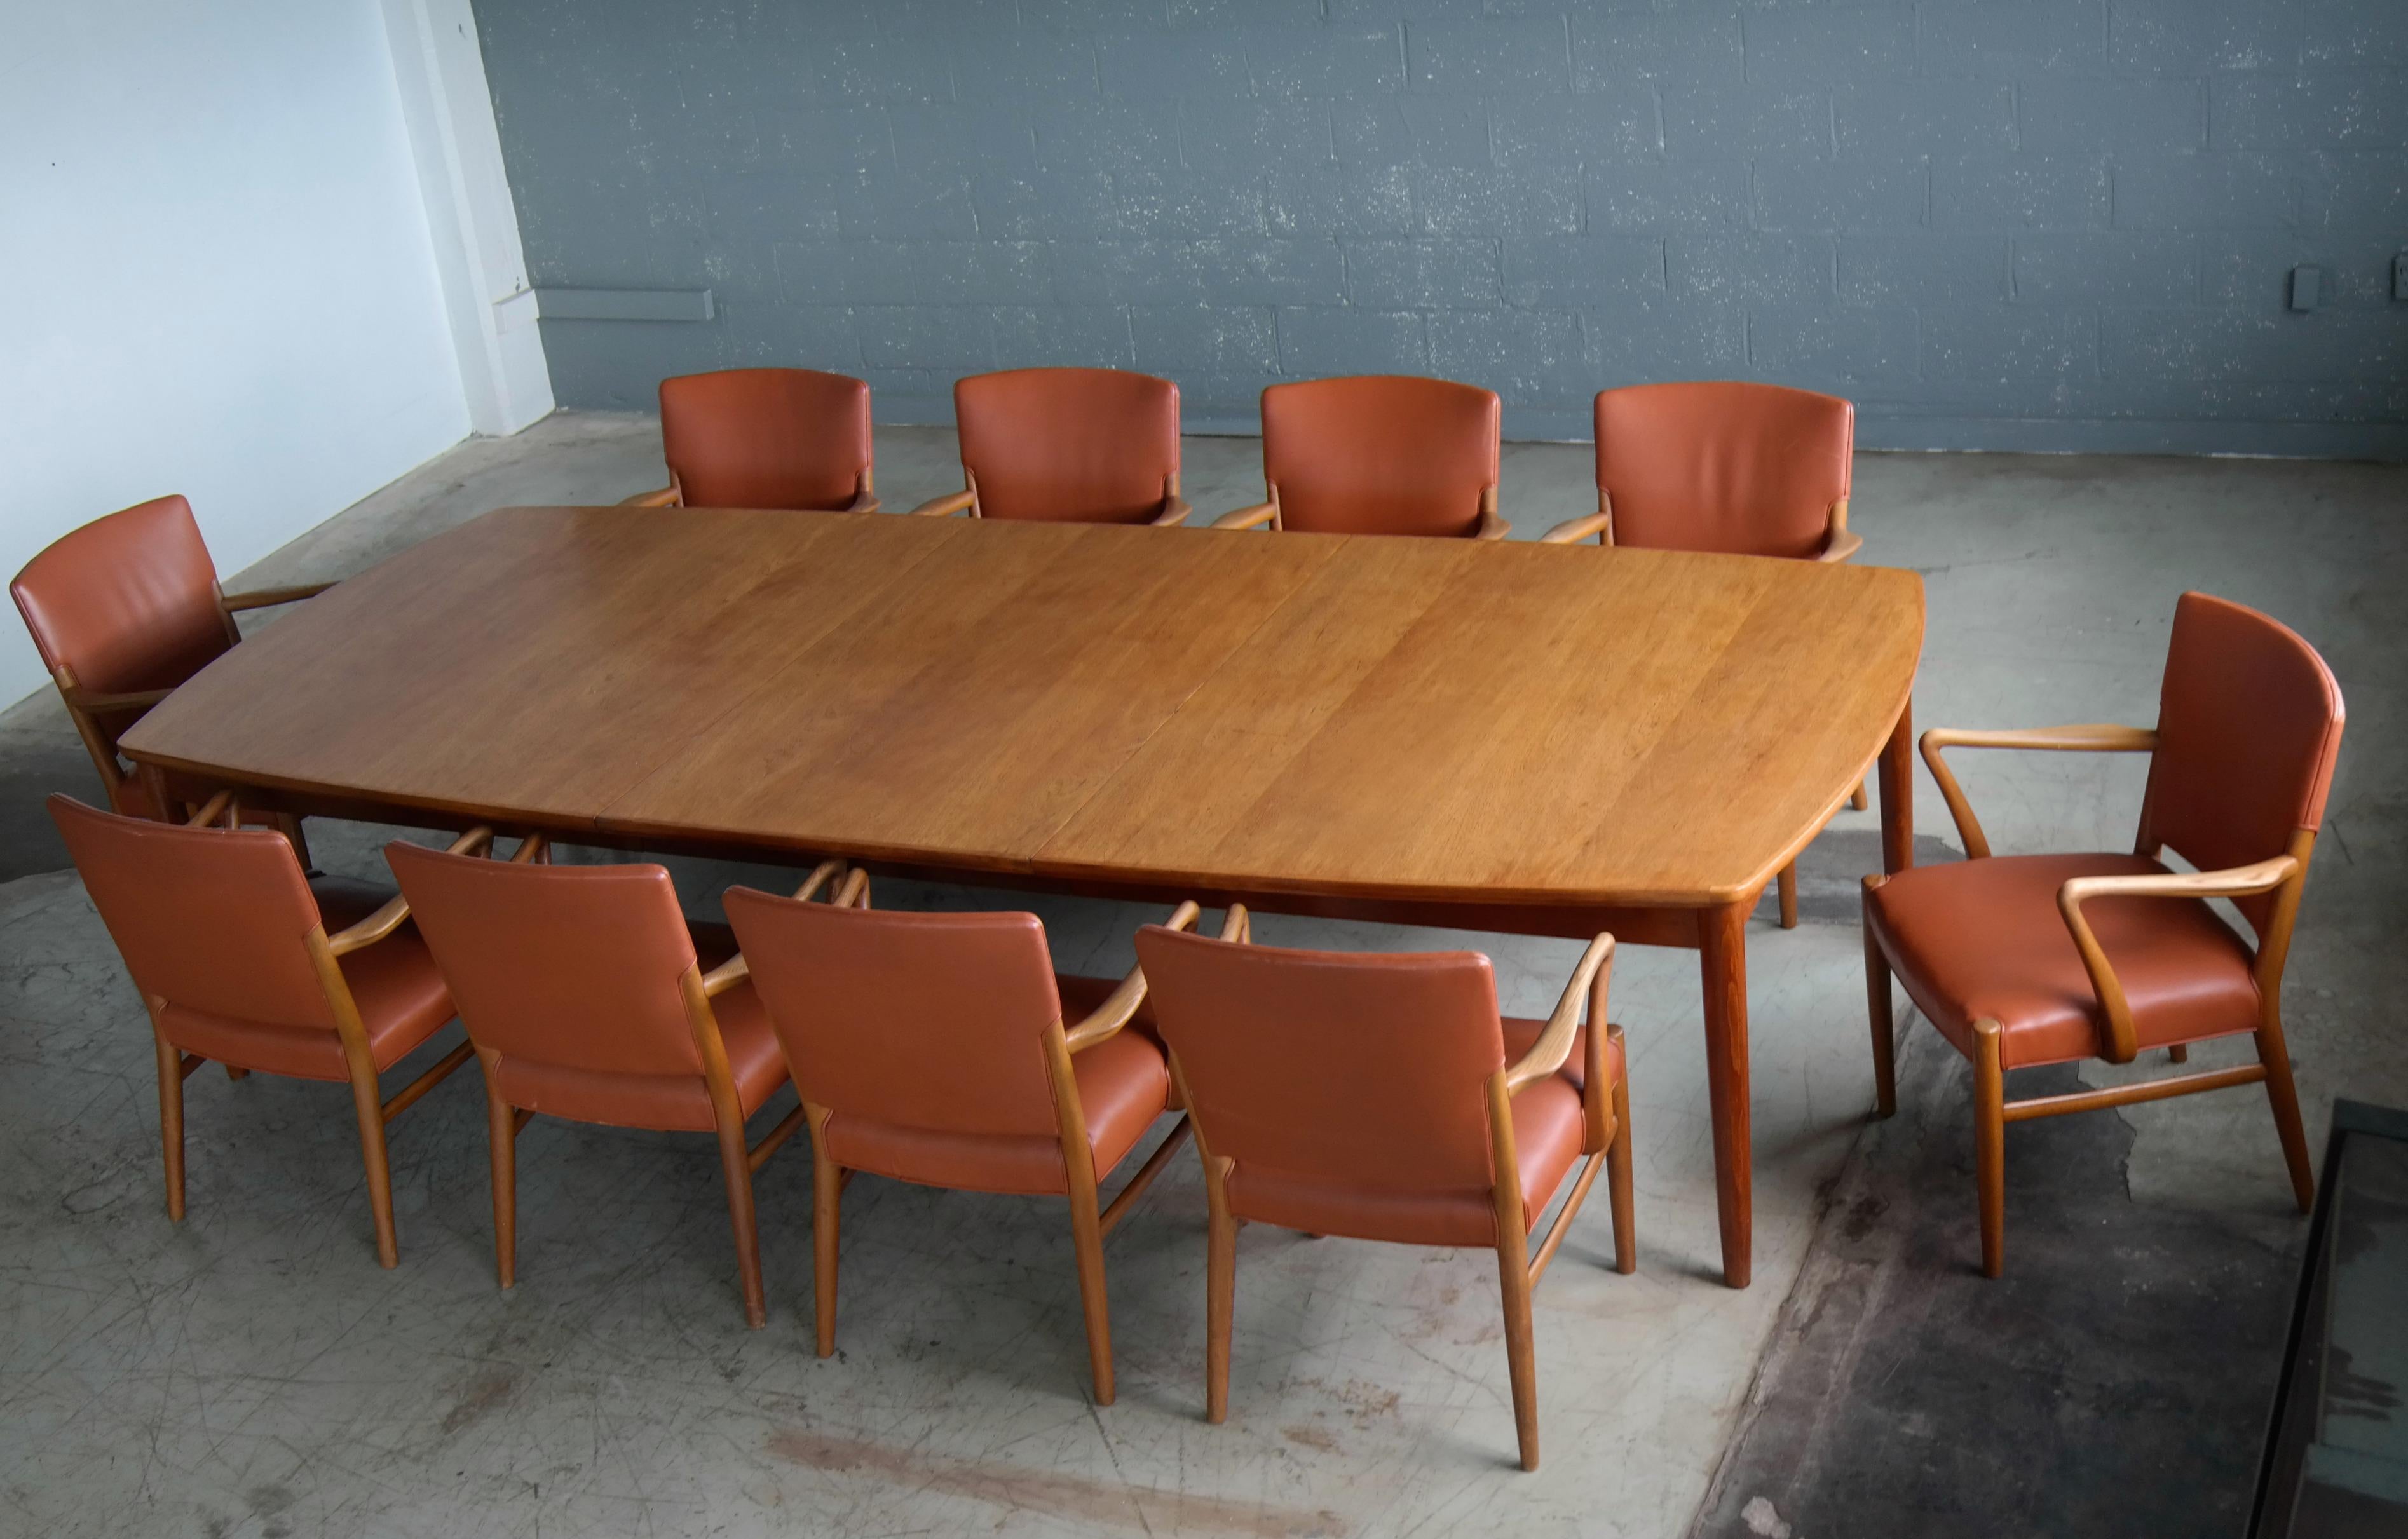 Rare to find fantastic set of 8 midcentury Danish conference chairs and table manufactured in the late 1960s. Beautiful armrests and legs in carved elmwood with great grain and color. The chairs are very much in the style of Fritz Hansen but the